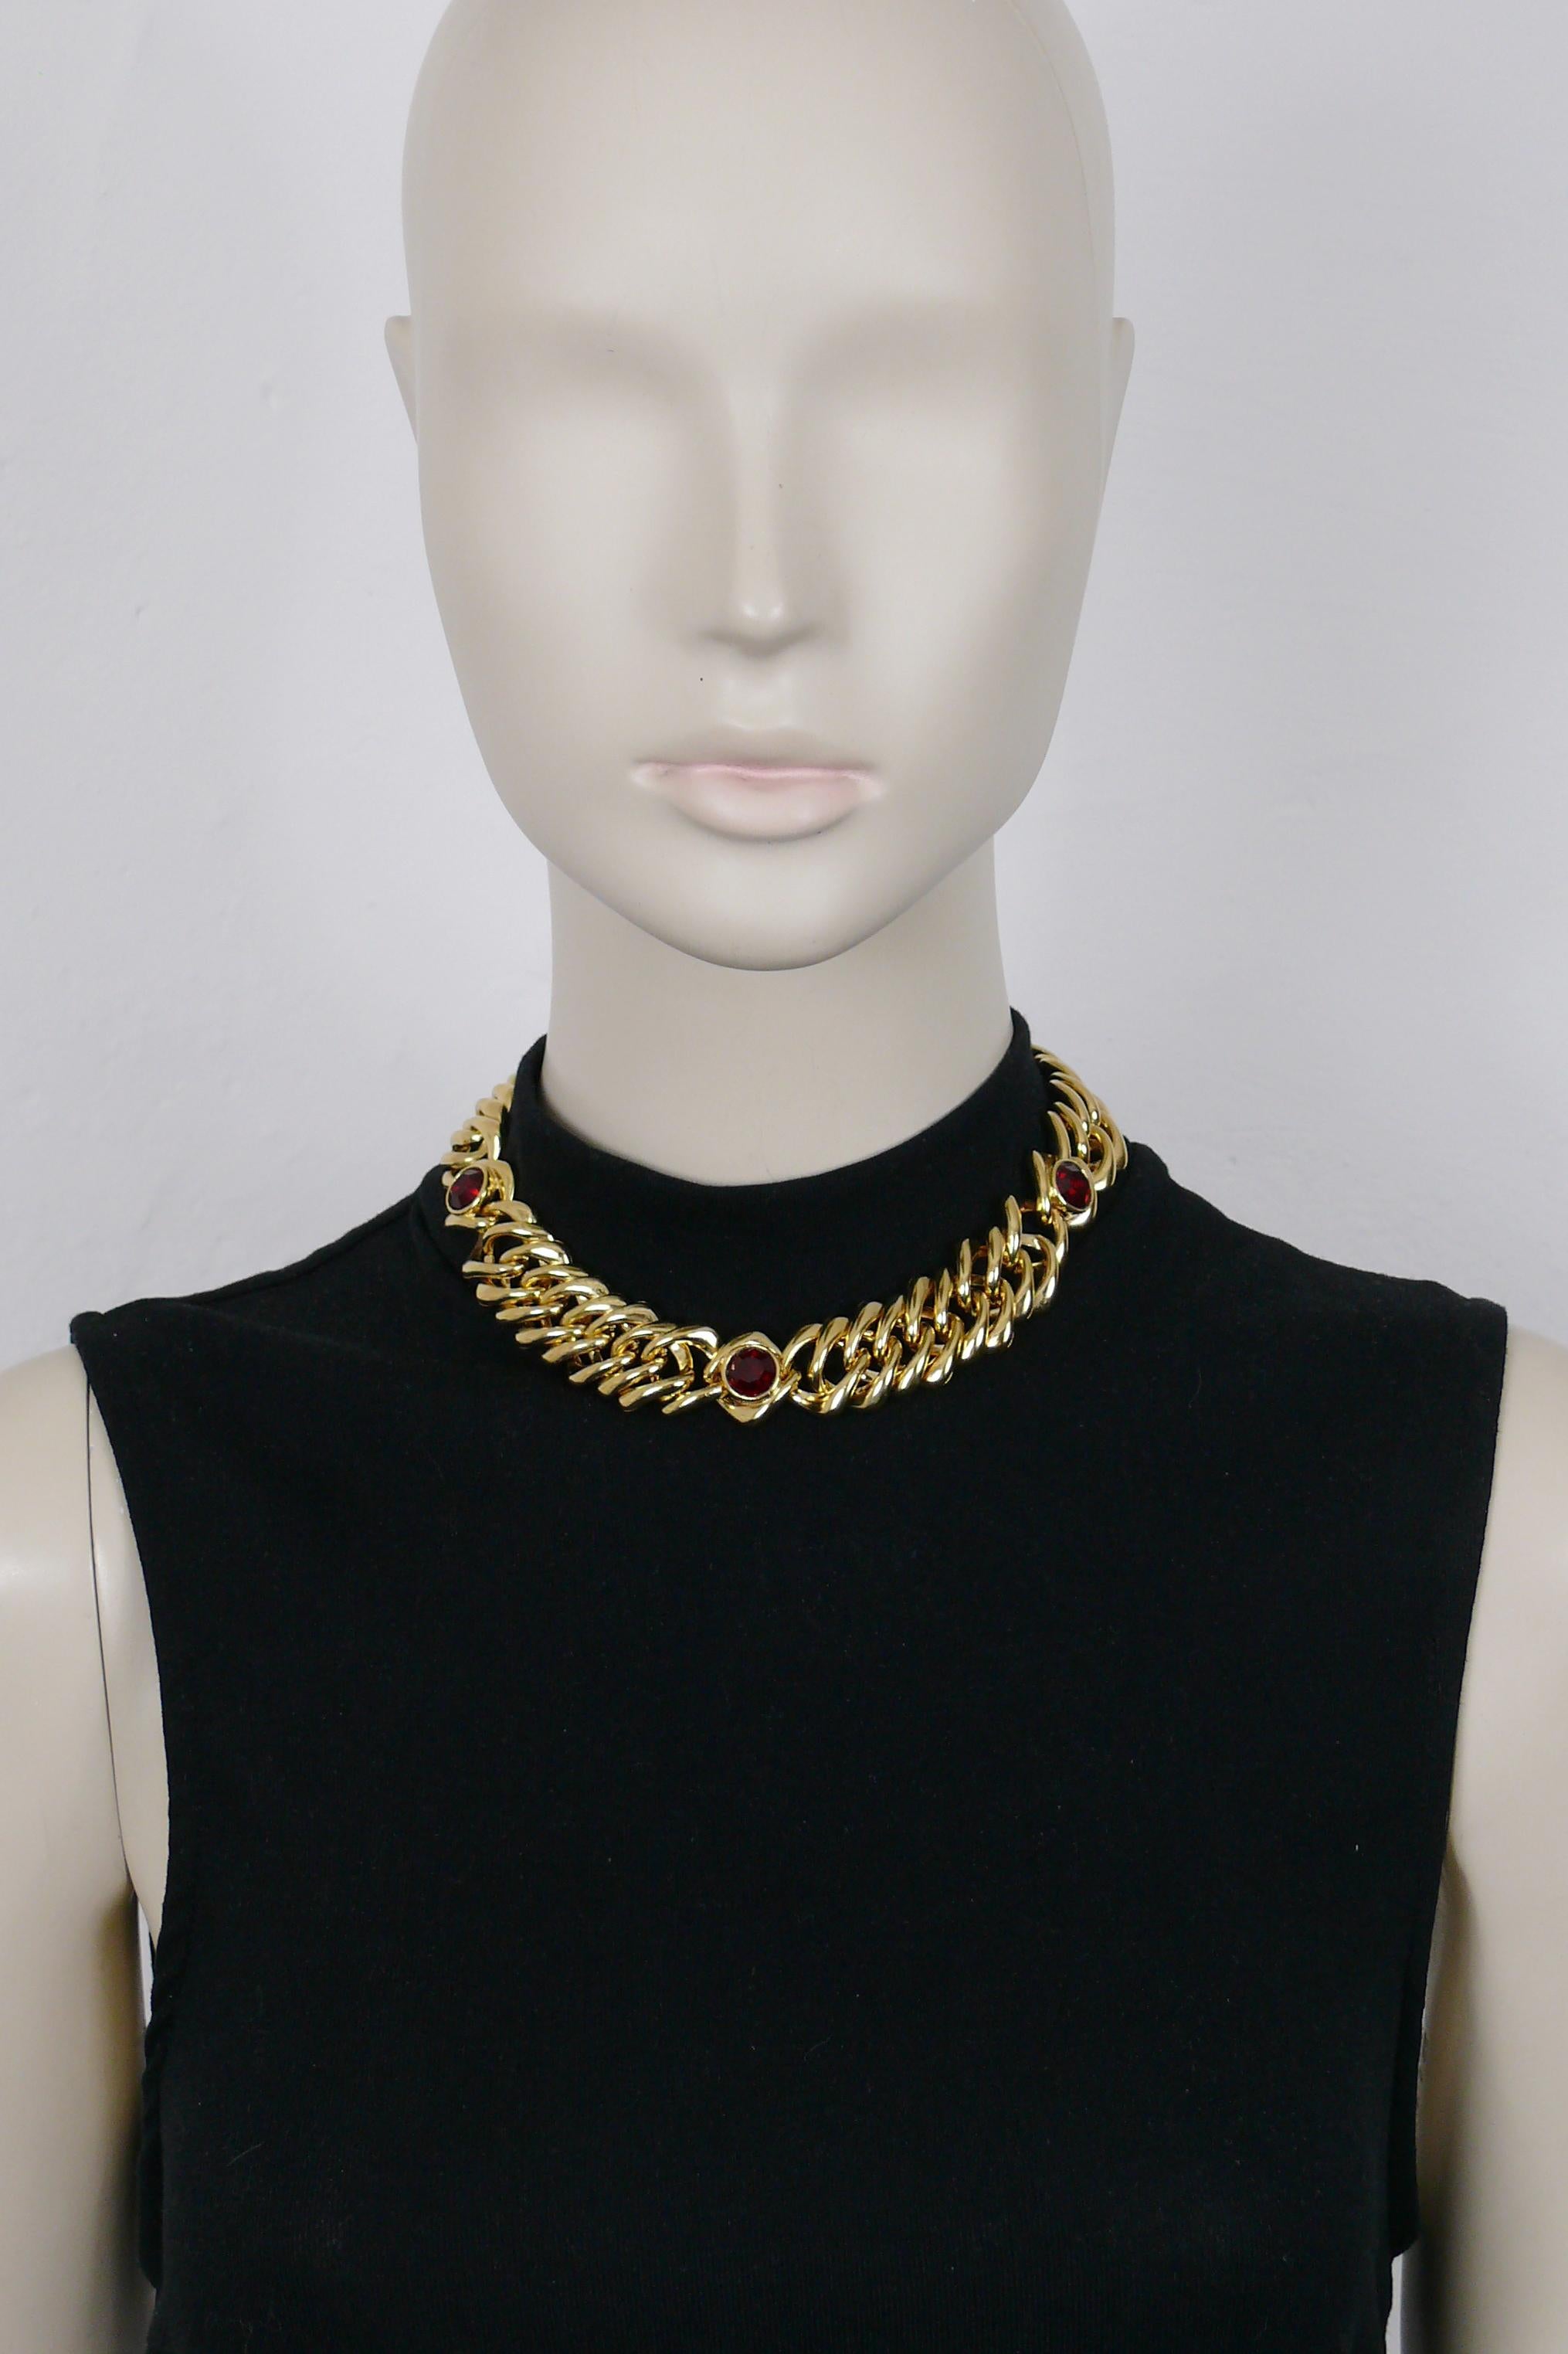 YVES SAINT LAURENT vintage iconic gold toned curb chain necklace embellished with three ruby red crystals.

Hook clasp closure.

Embossed YSL Made in France.

Indicative measurements : length approx. 38 cm (14.96 inches) / width approx. 2.2 cm (0.87